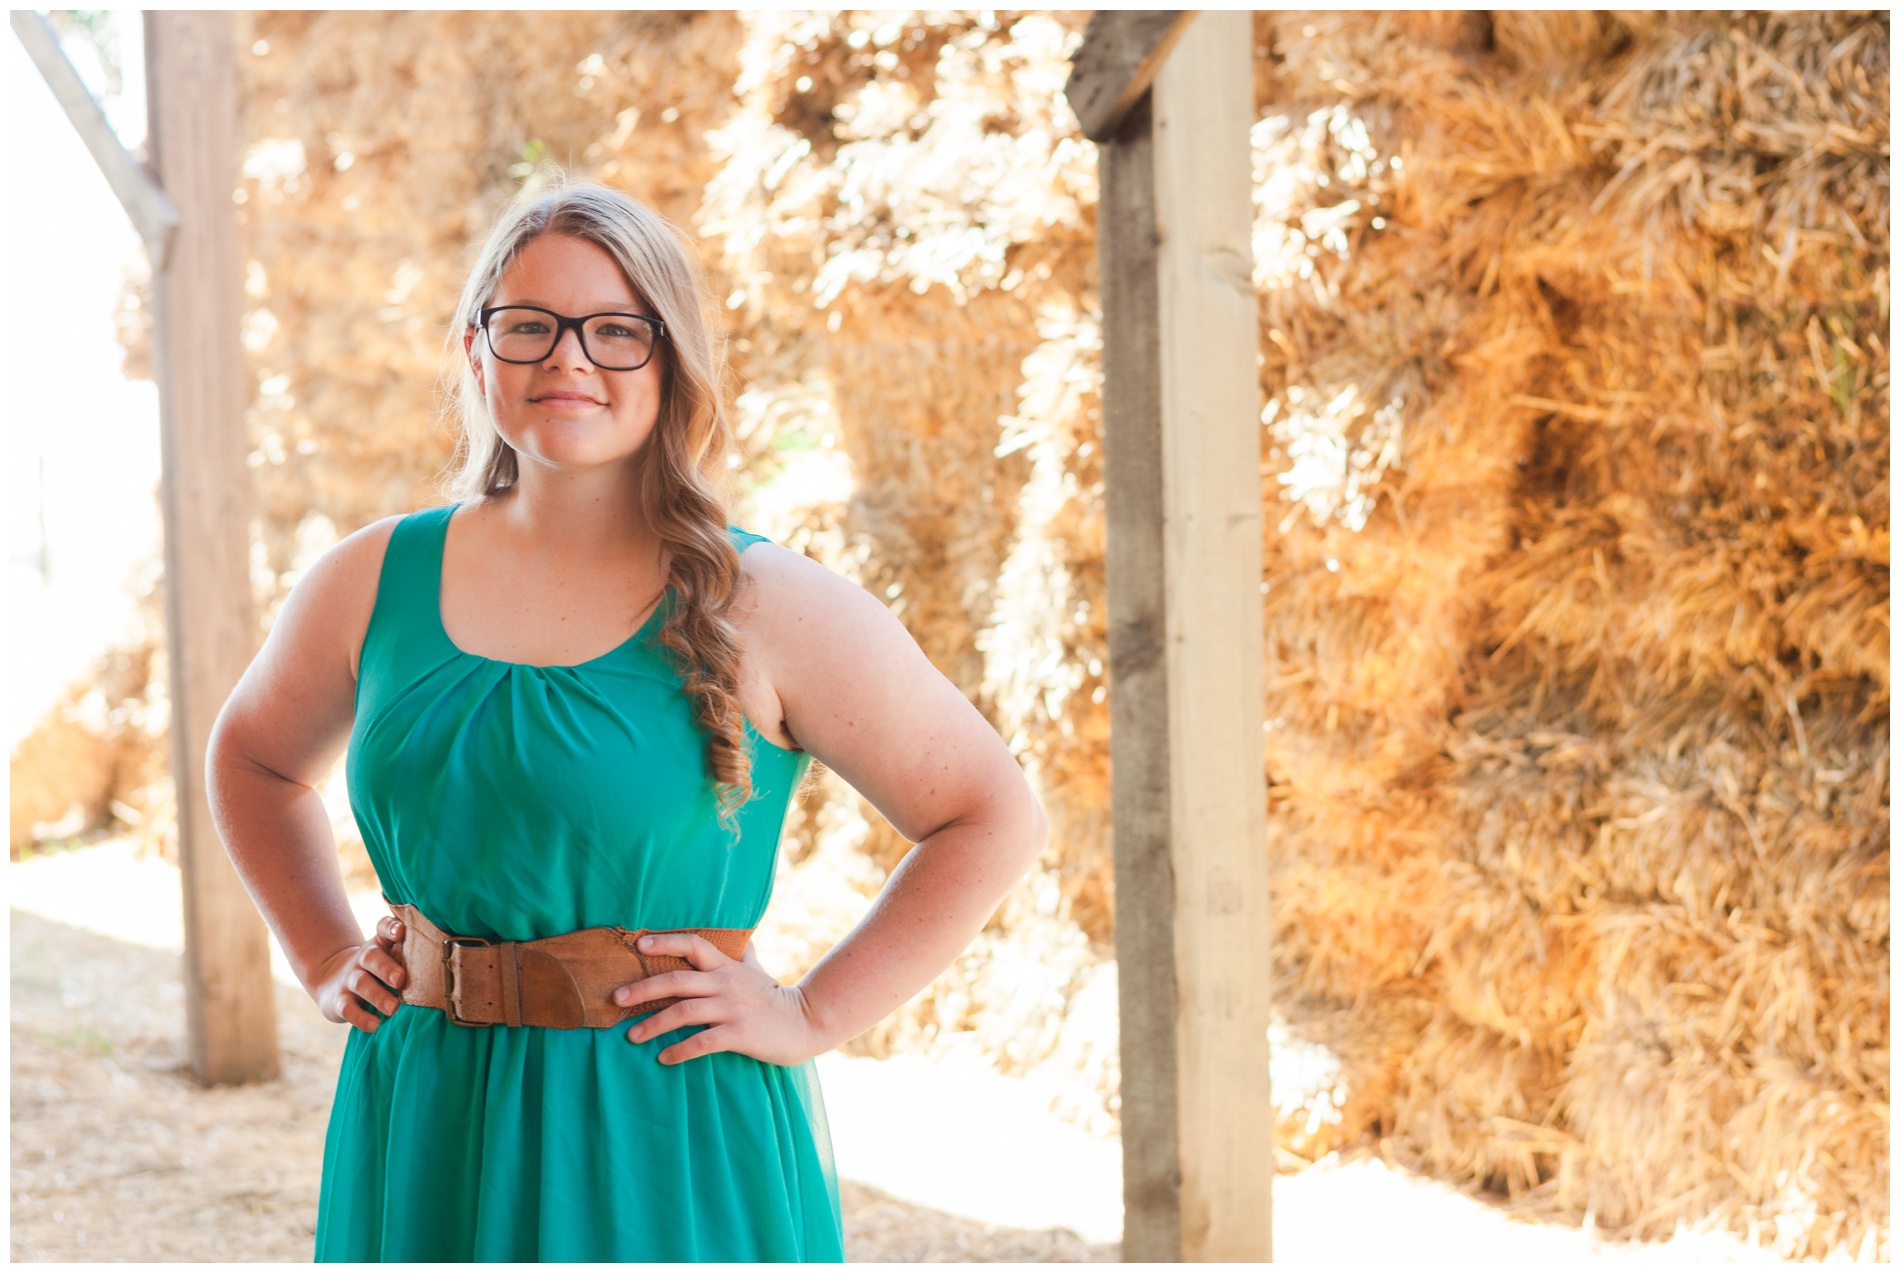 Senior picture of a girl in a hay shed in Ontario, Oregon.